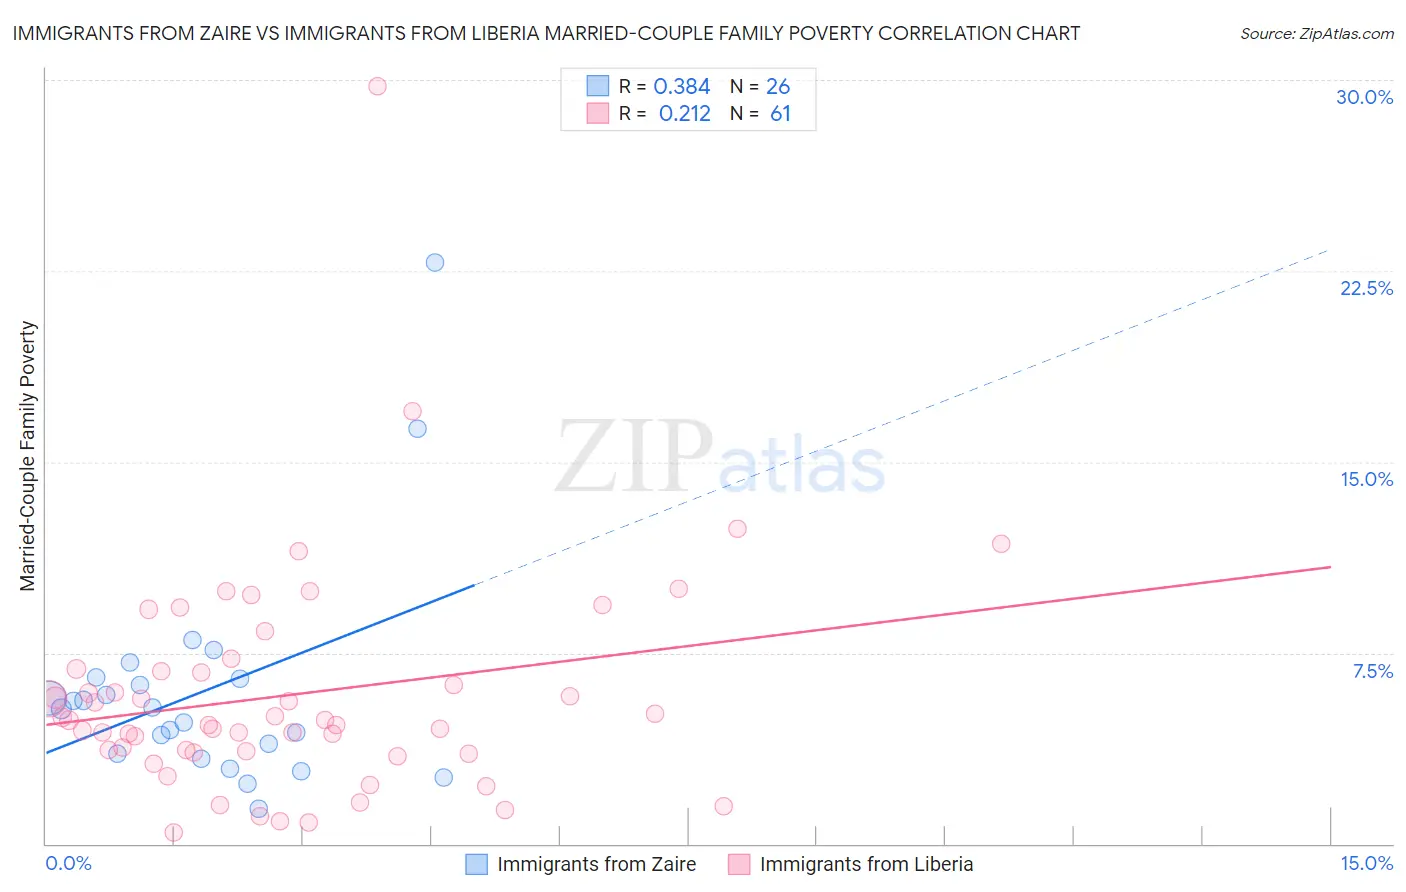 Immigrants from Zaire vs Immigrants from Liberia Married-Couple Family Poverty